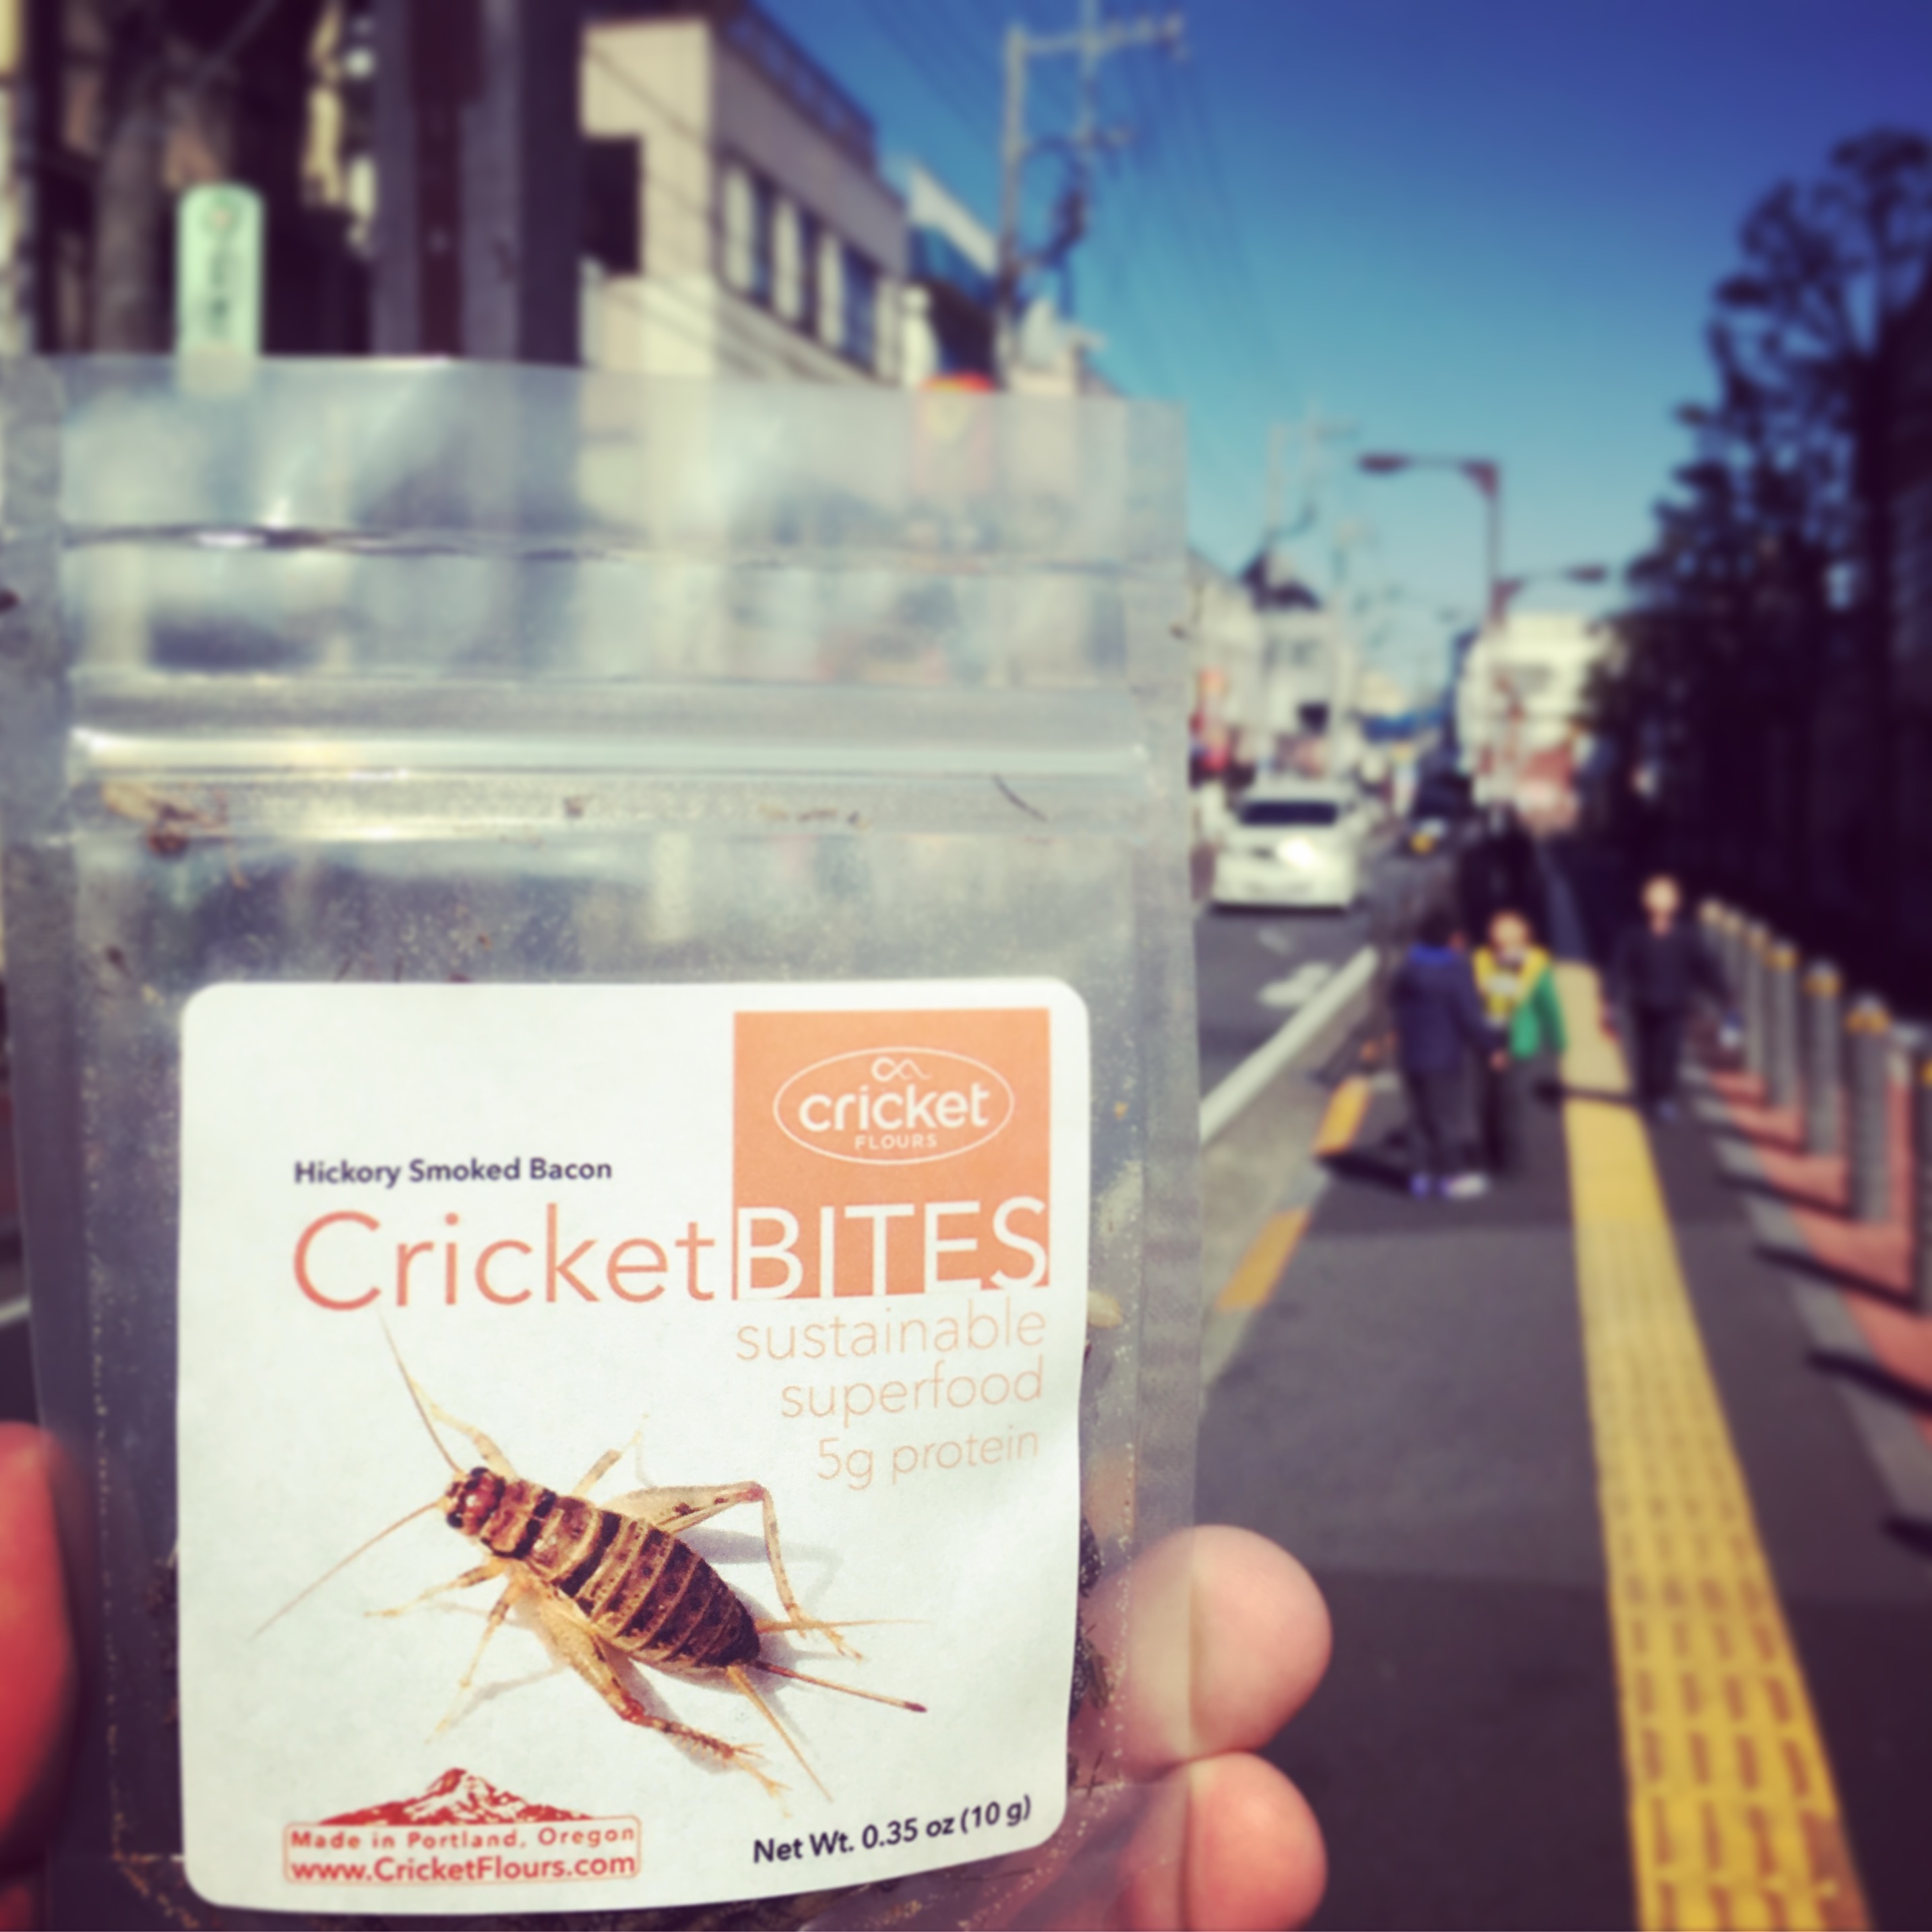 Japan Edible Insects